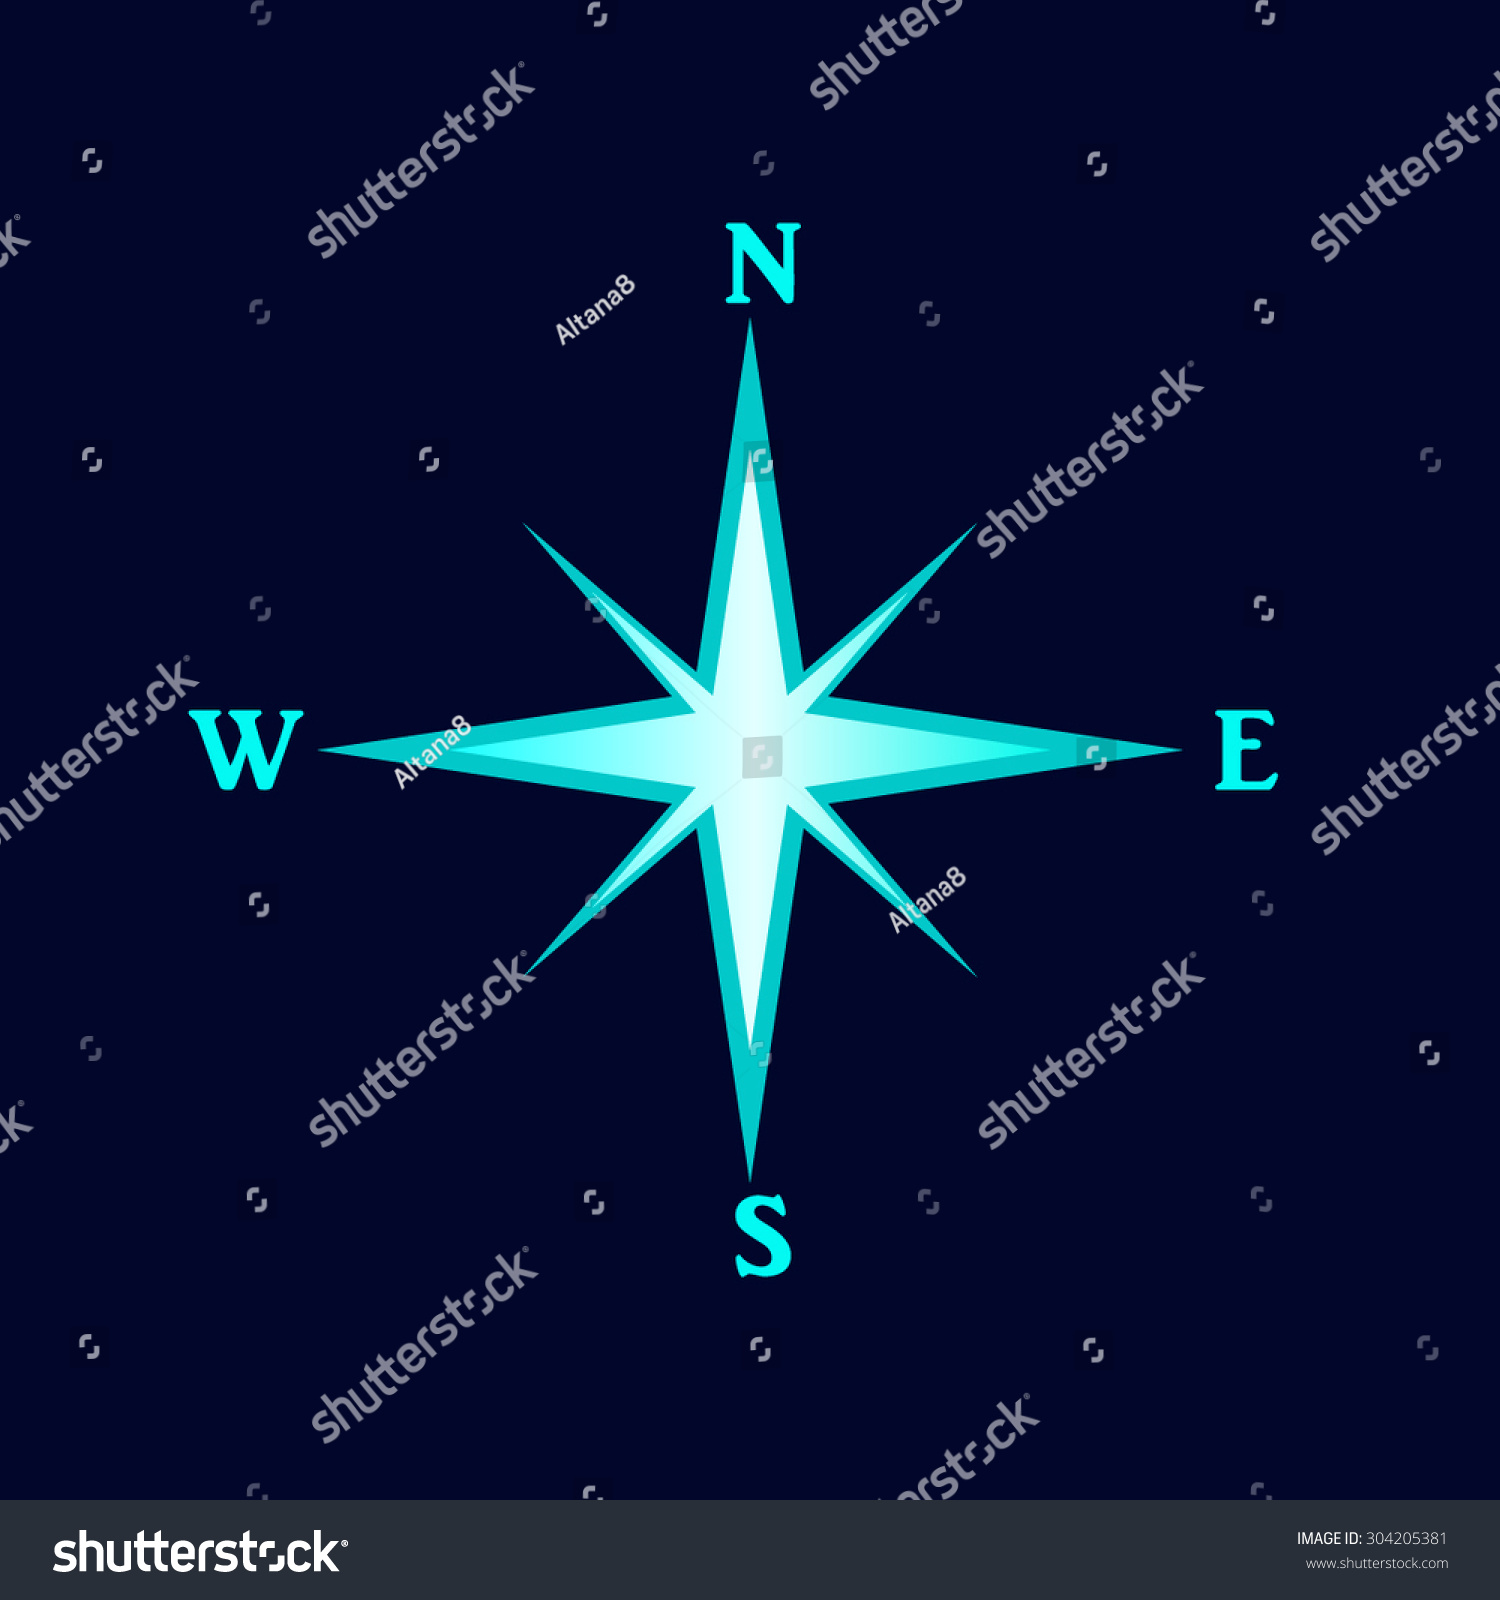 Illustration Compass Rose Stock Vector Royalty Free 304205381 4788